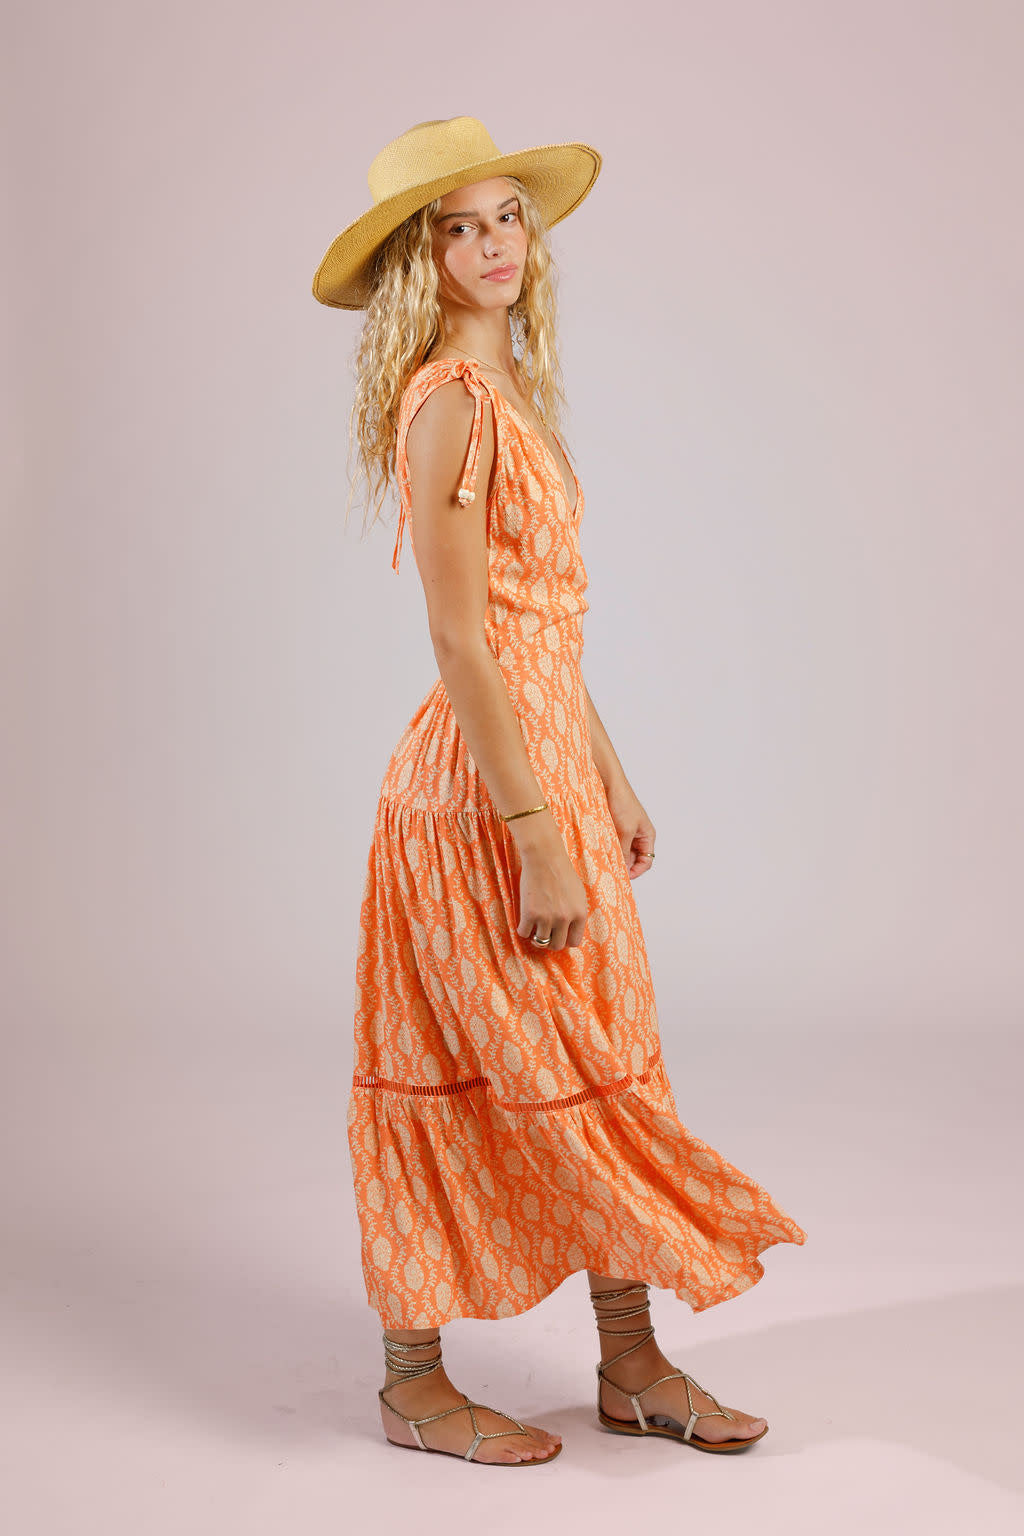 Band of the Free Loja Dress in Apricot